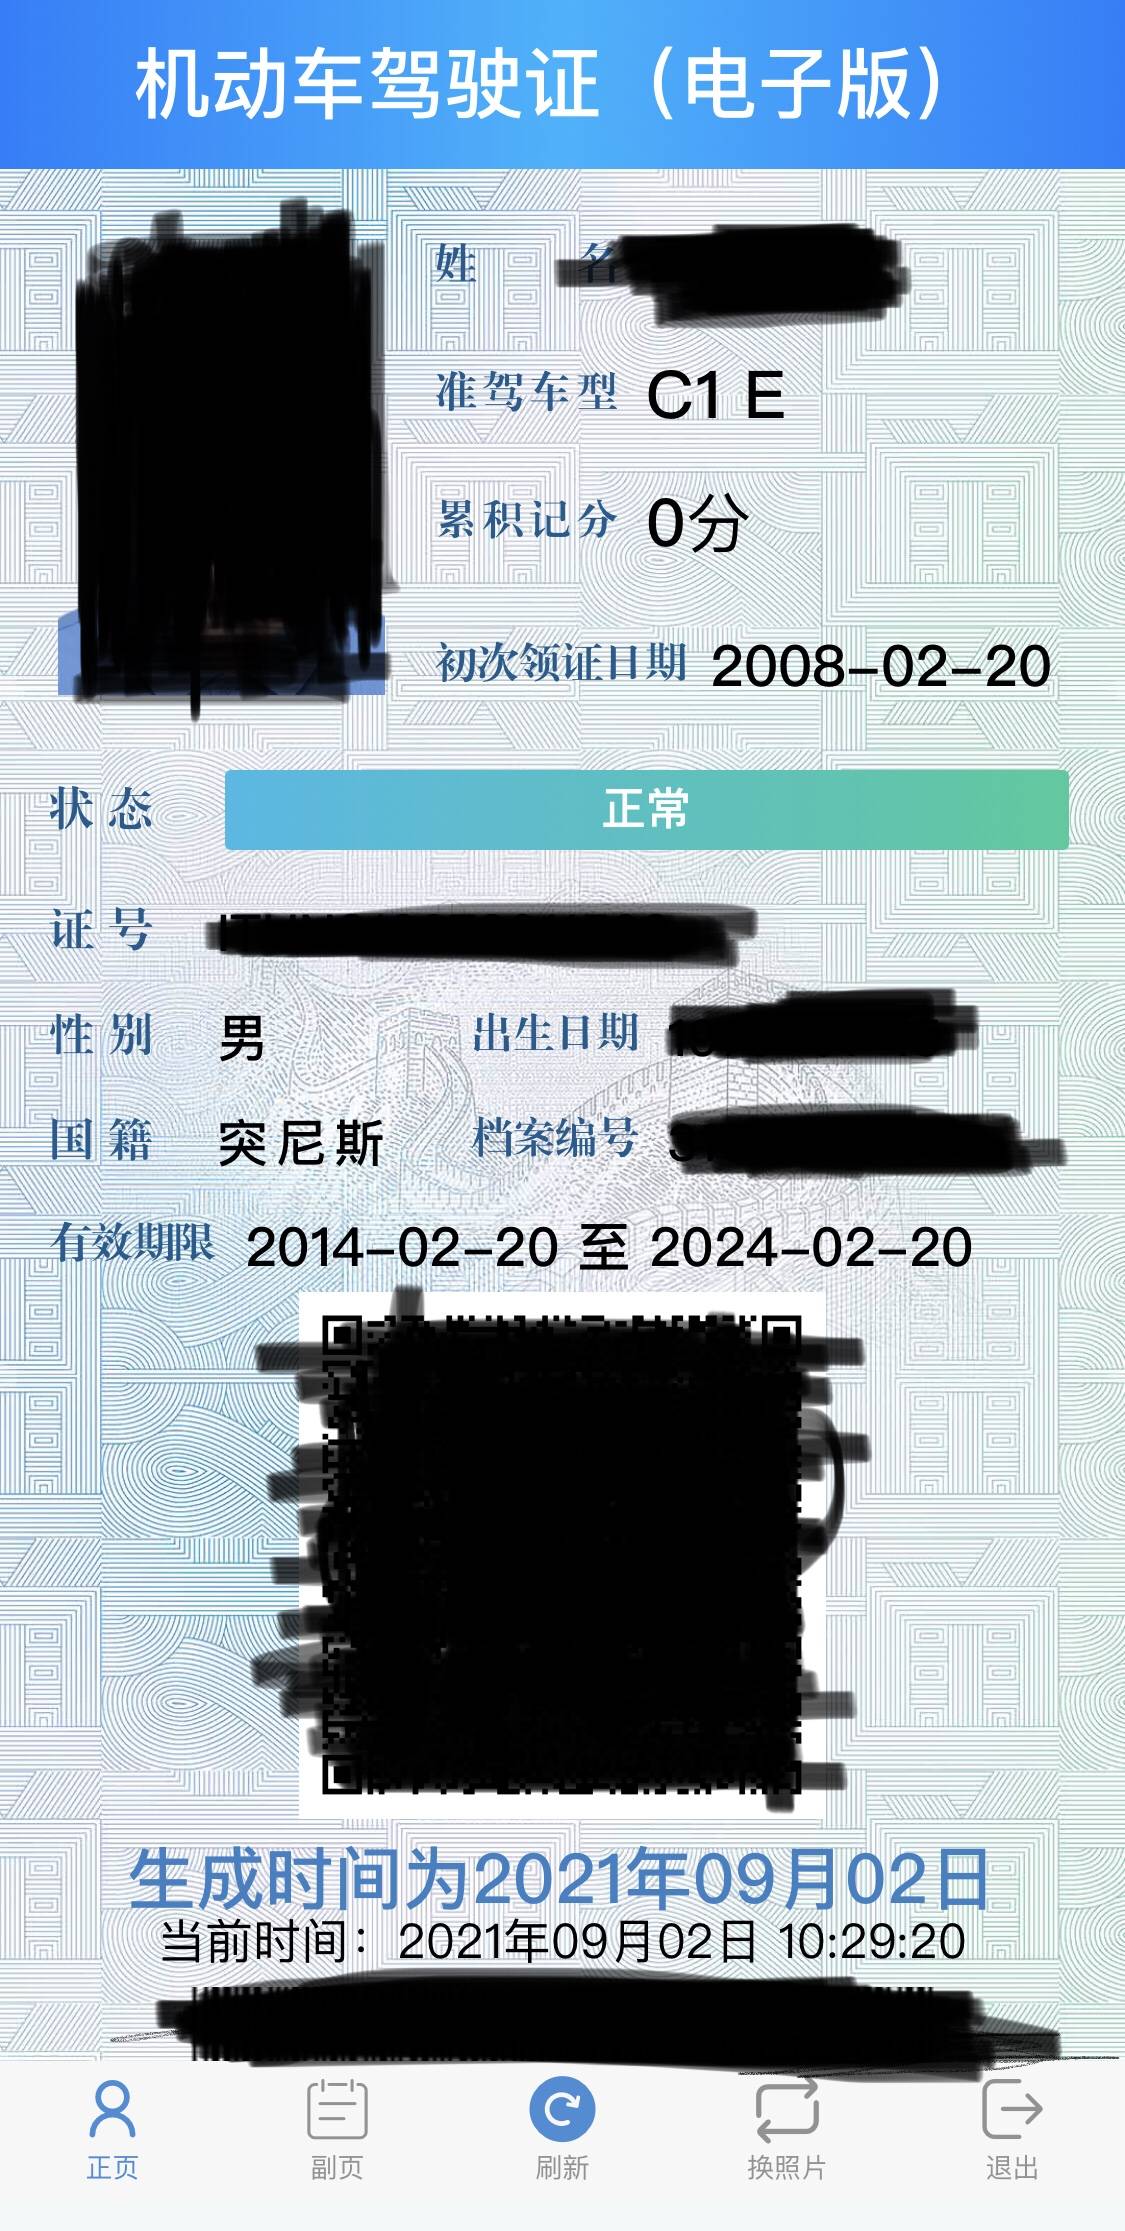 Digital version of the Chinese Driver's license